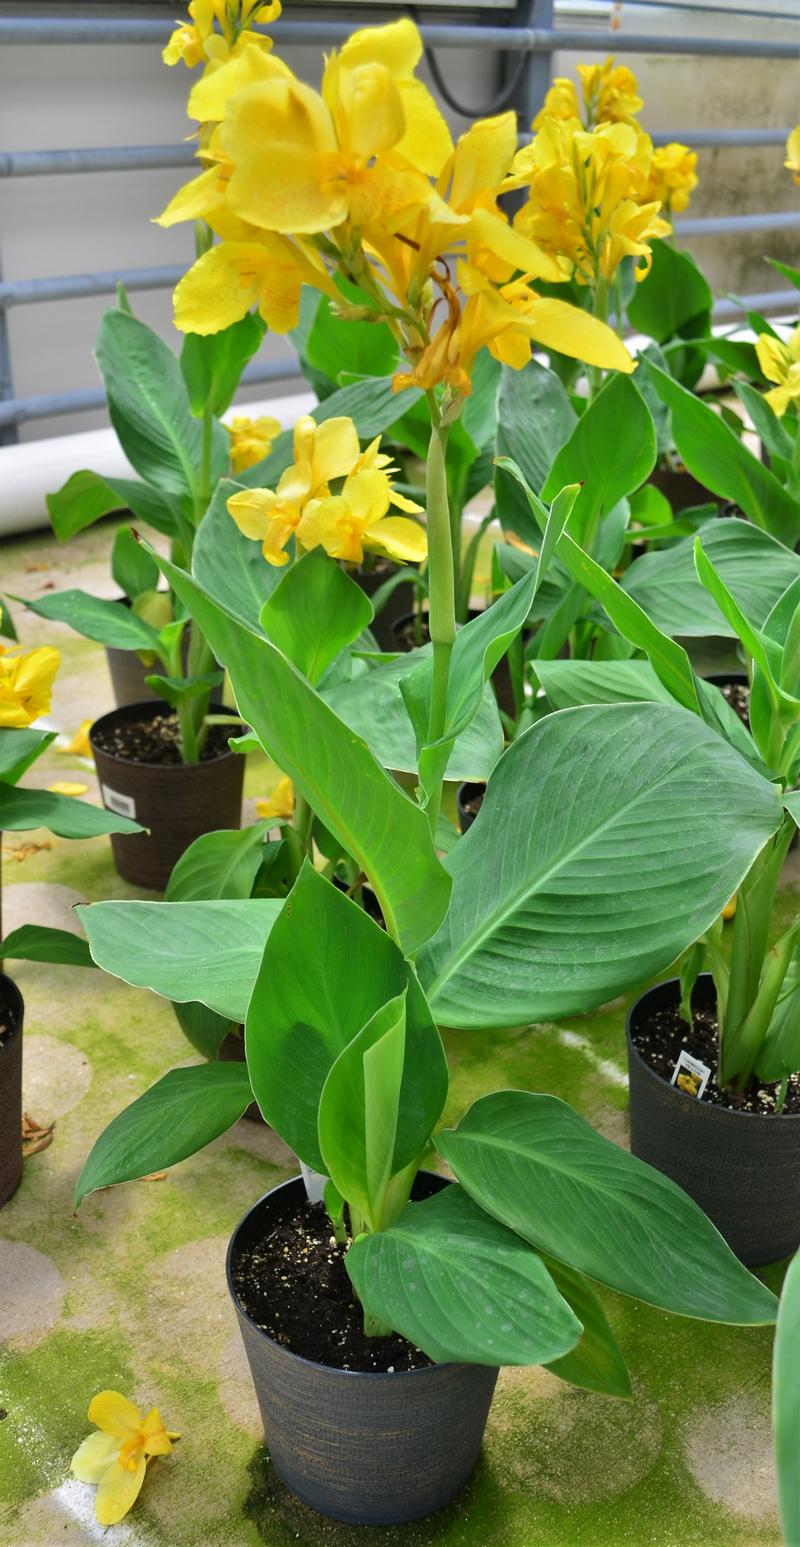 Canna x generalis Cannova 'Yellow' - Canna Lily from Hillcrest Nursery